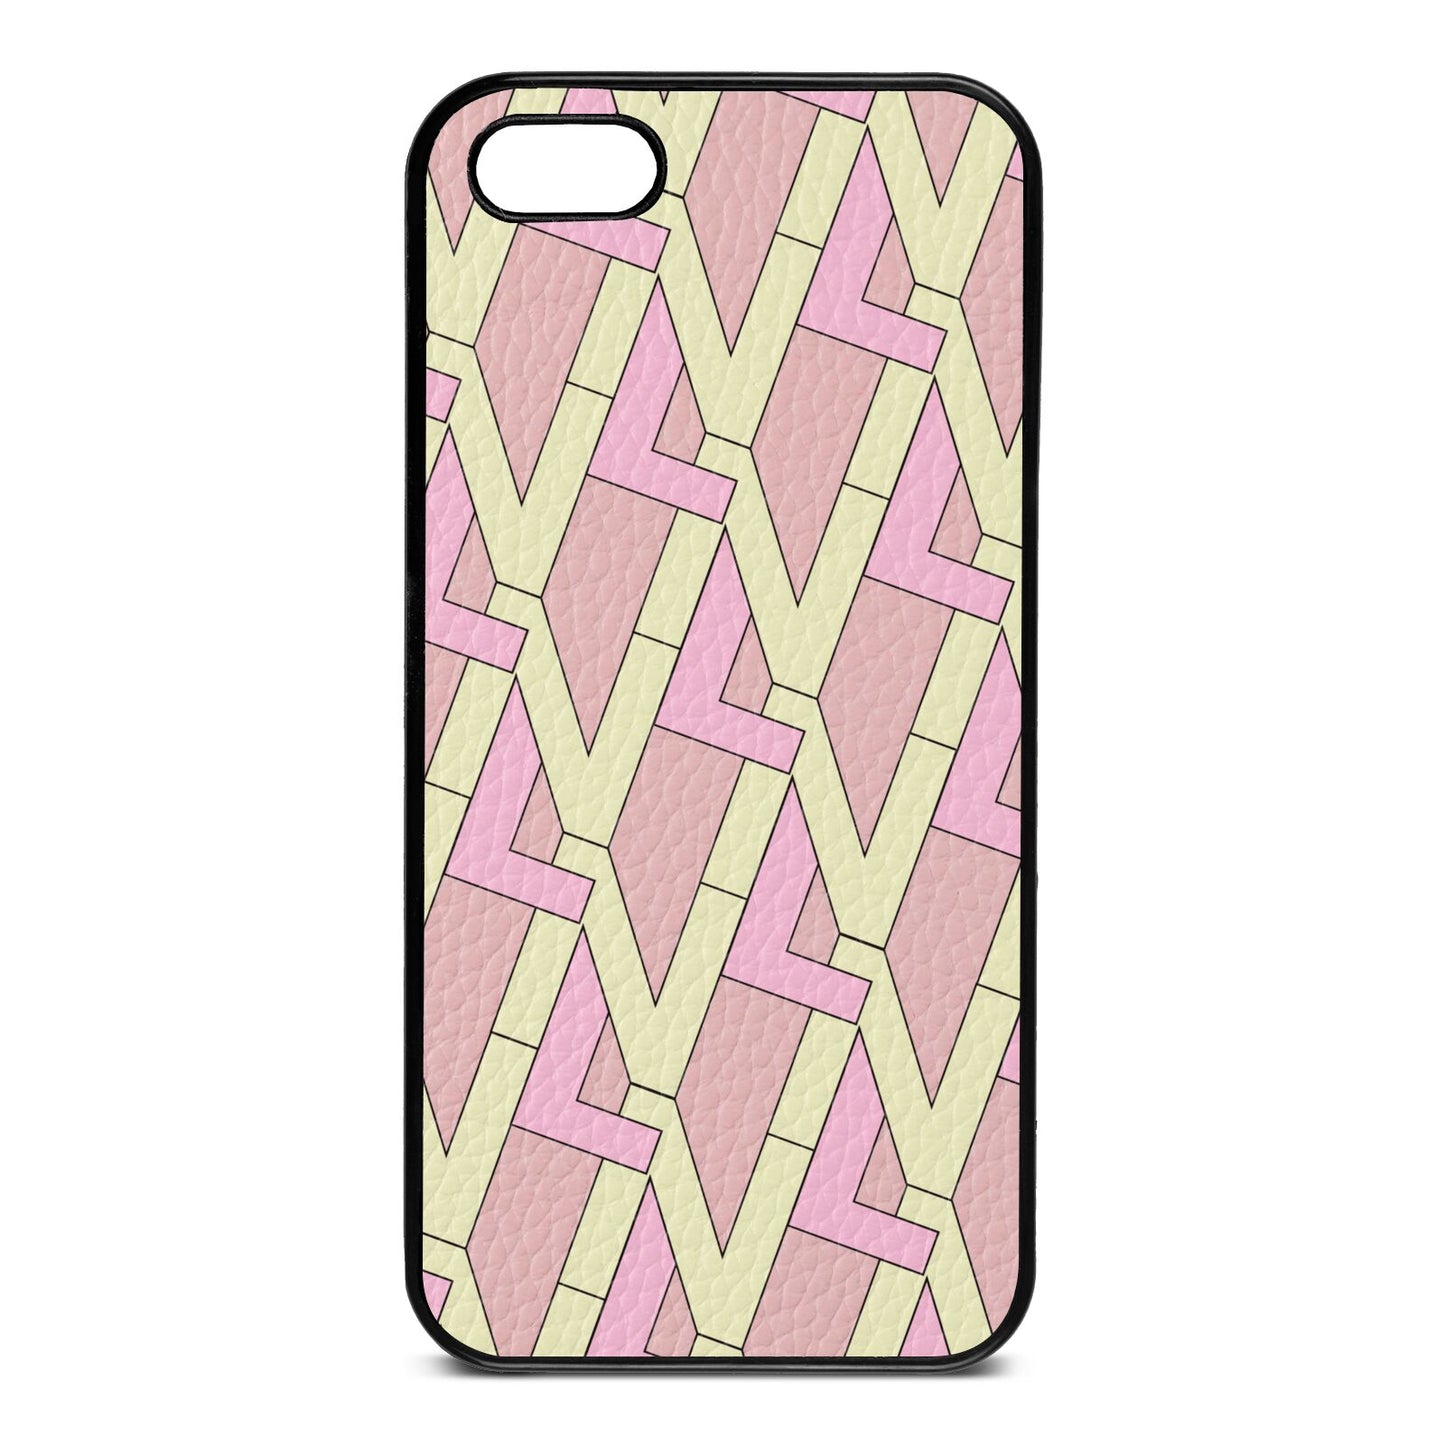 Logo Pink Pebble Leather iPhone 5 Case